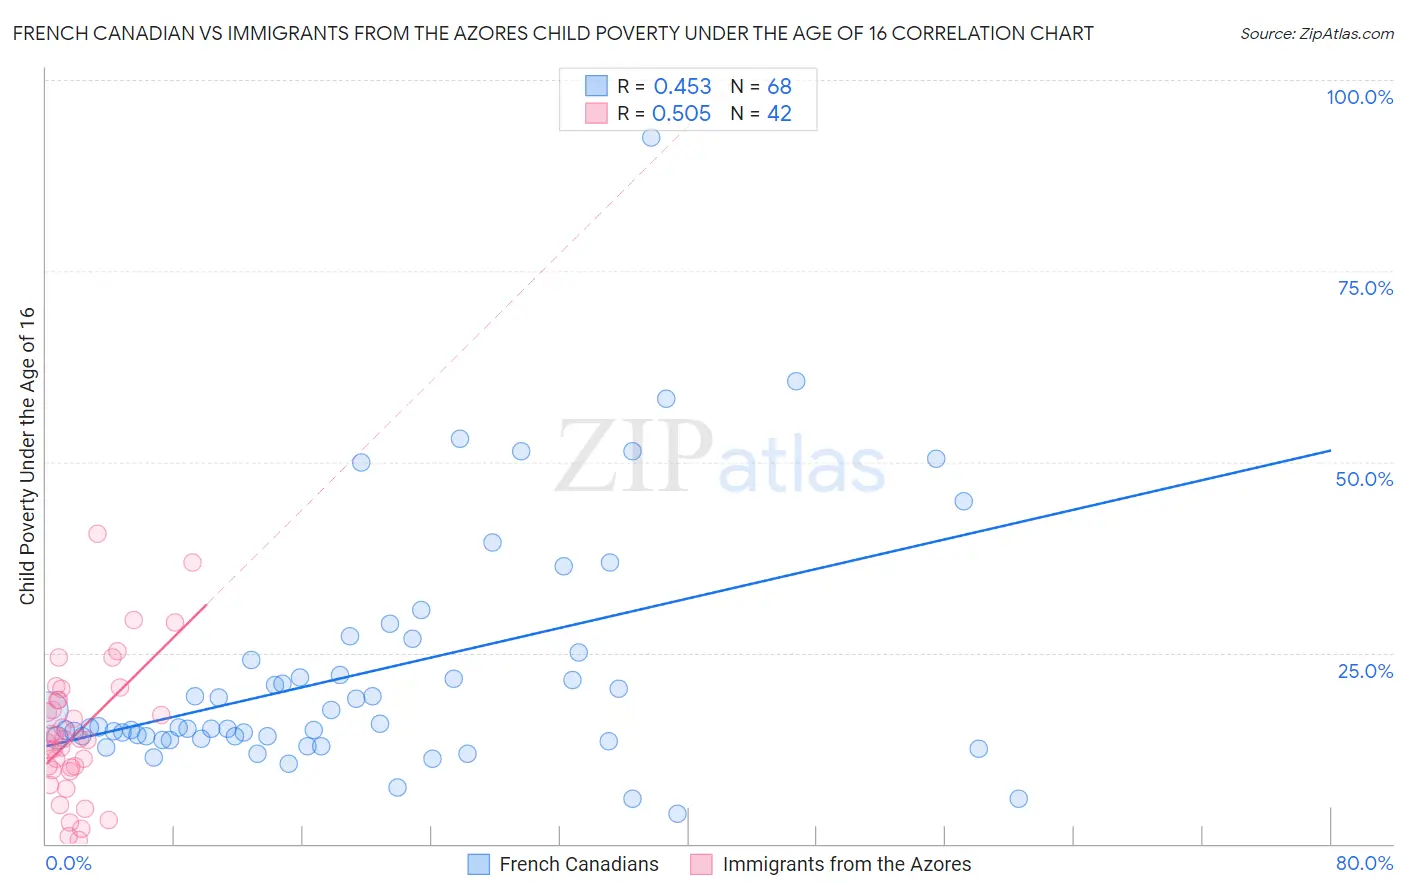 French Canadian vs Immigrants from the Azores Child Poverty Under the Age of 16